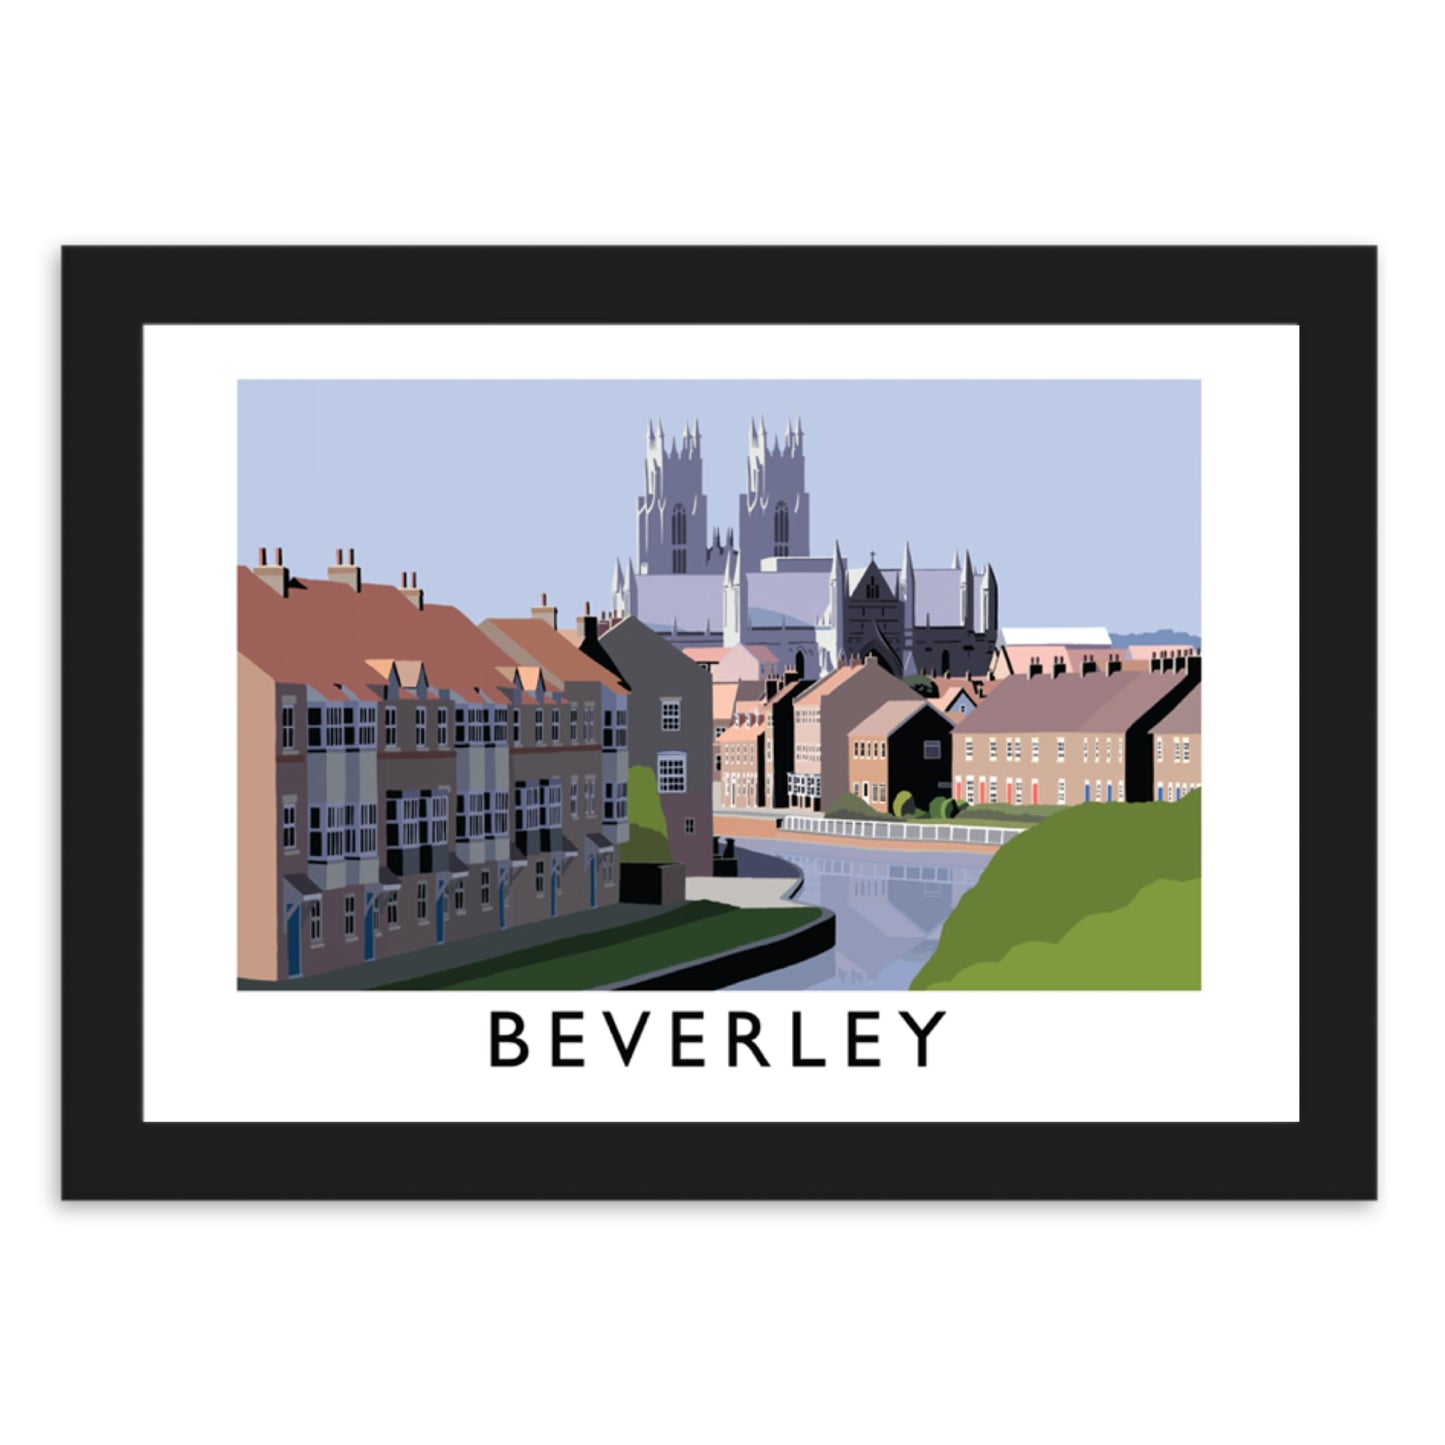 Beverley Print - The Great Yorkshire Shop